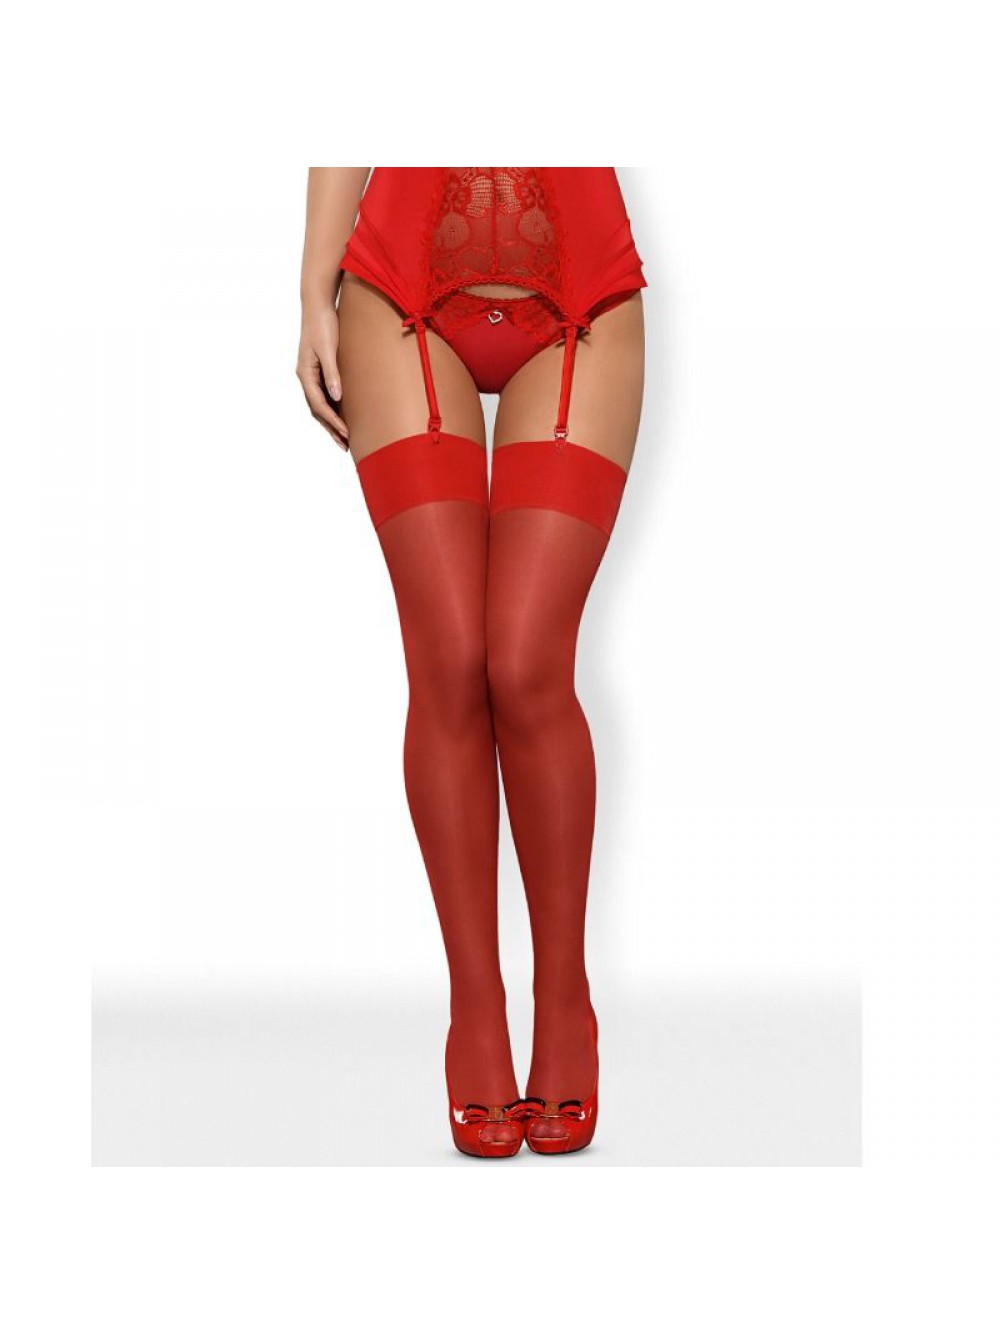 STOCKINGS S800 - RED - L/XL